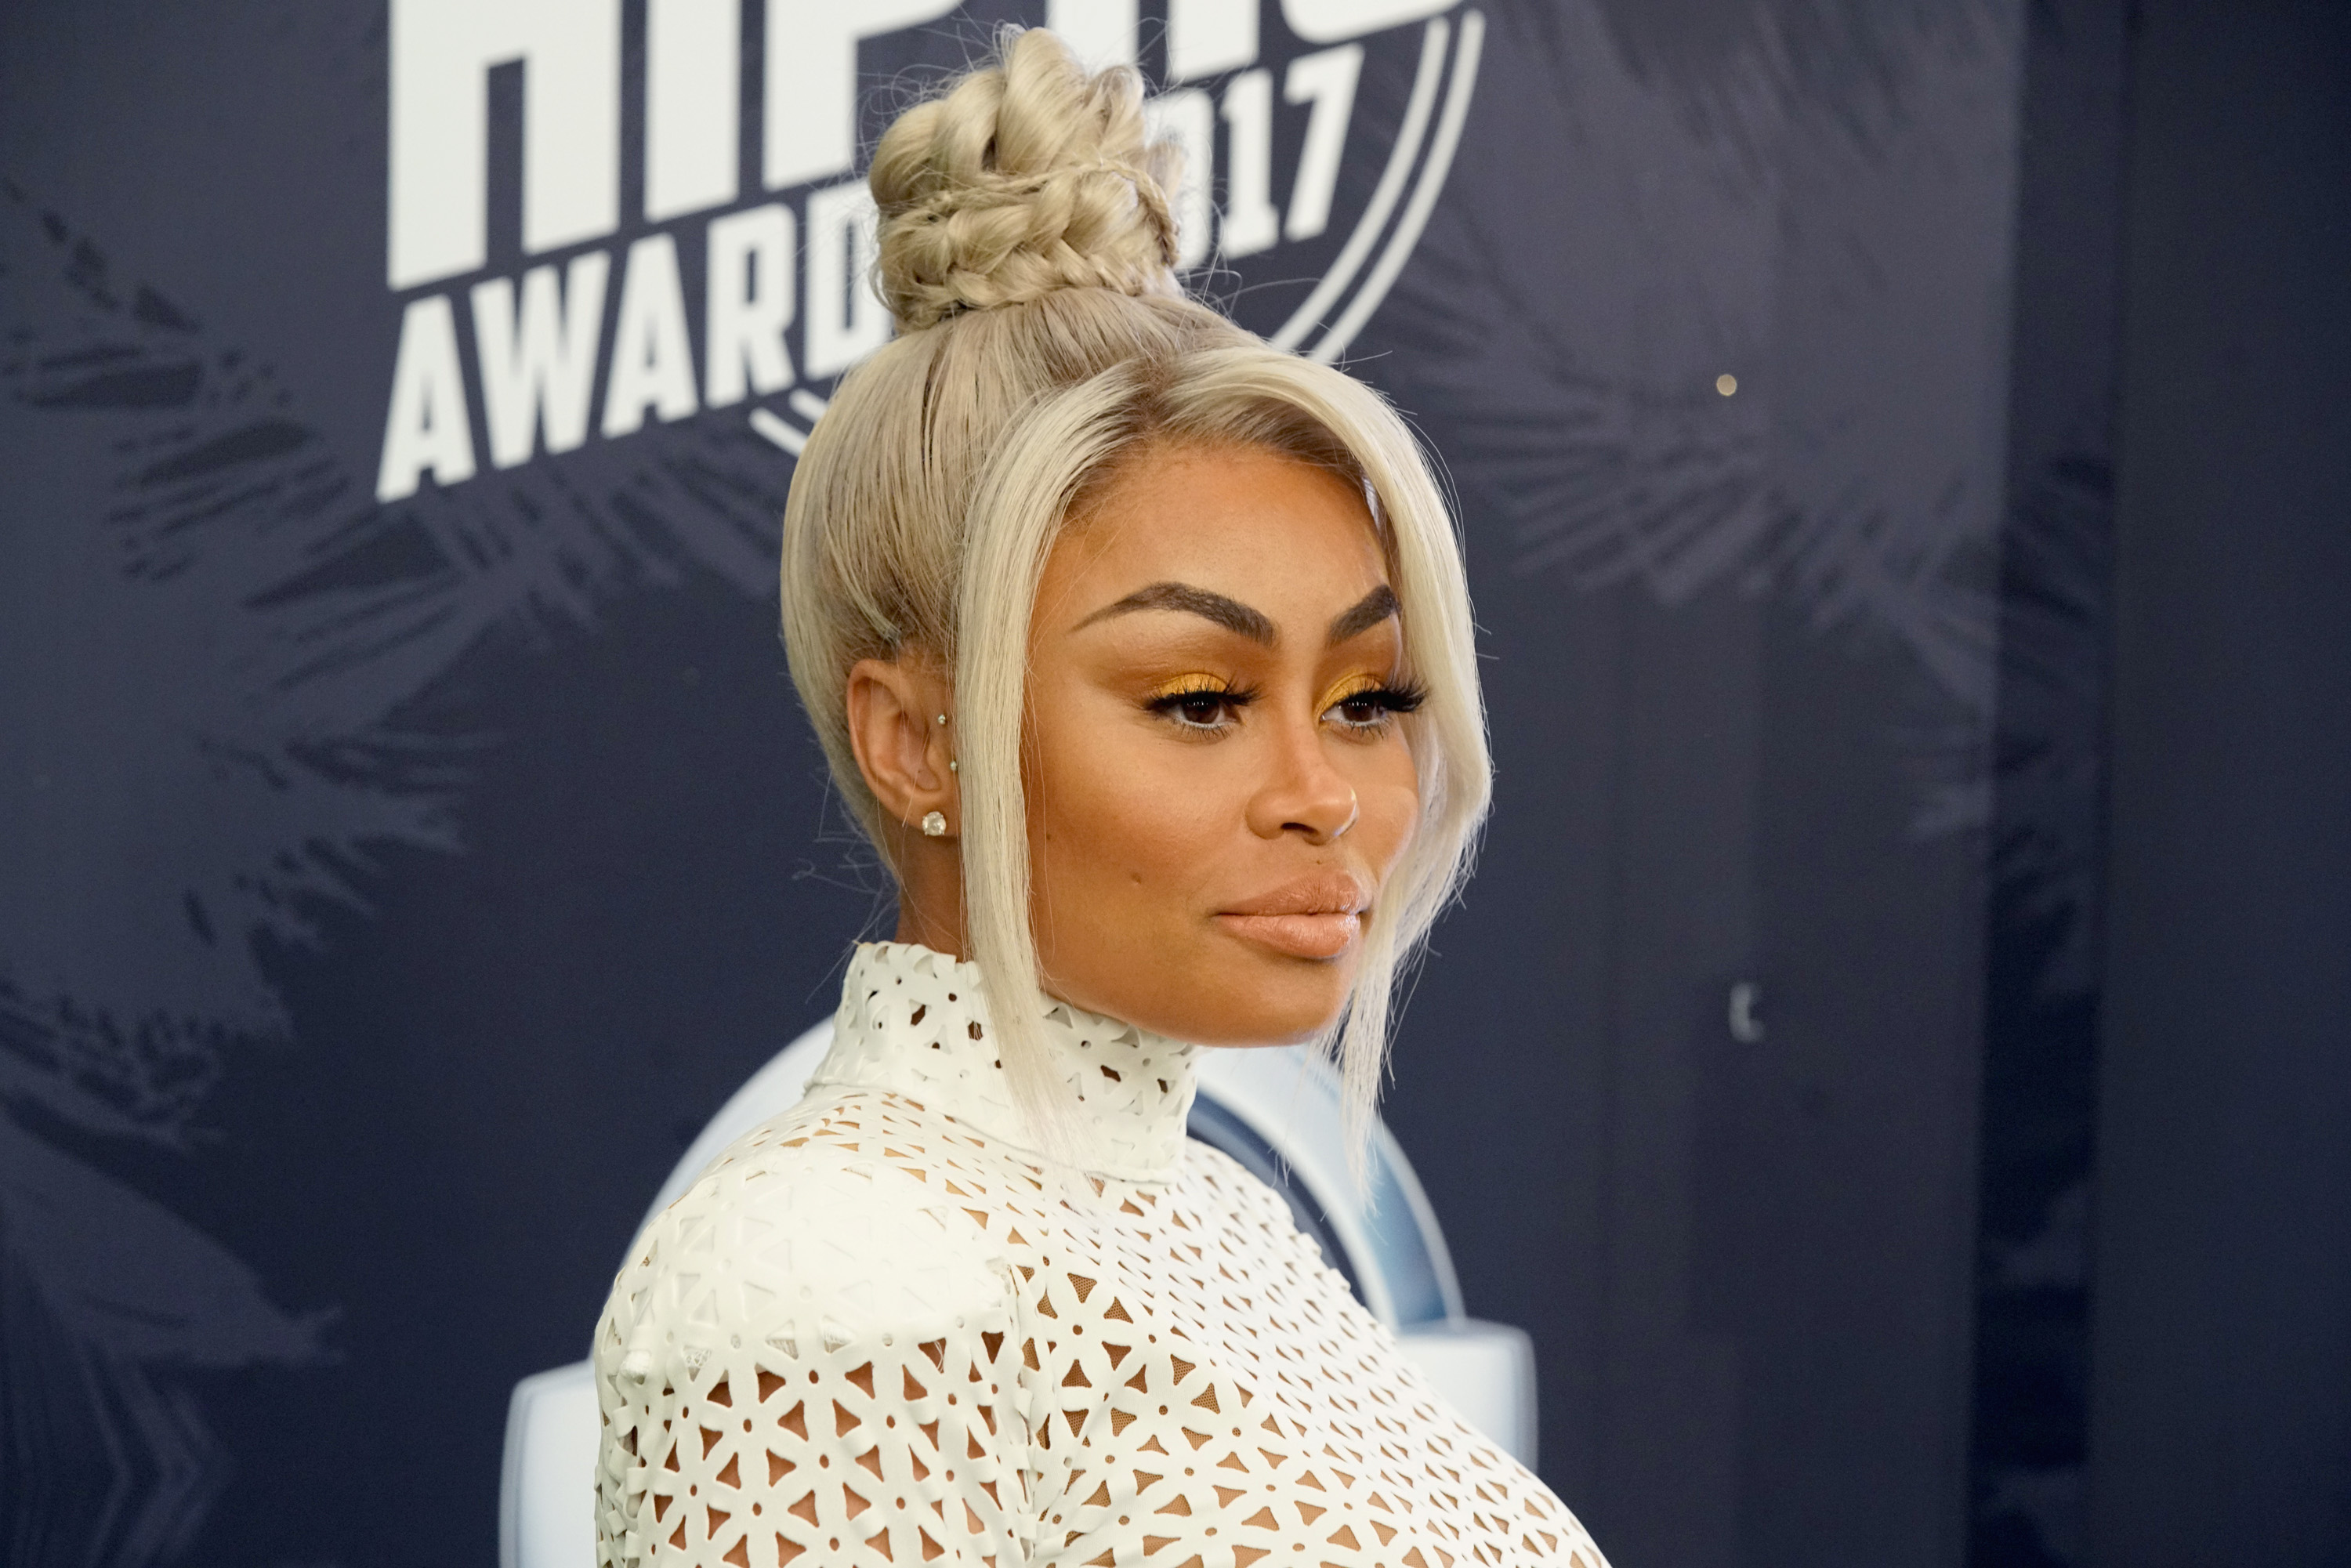 Blac Chyna is seen for first time since sex tape leaked